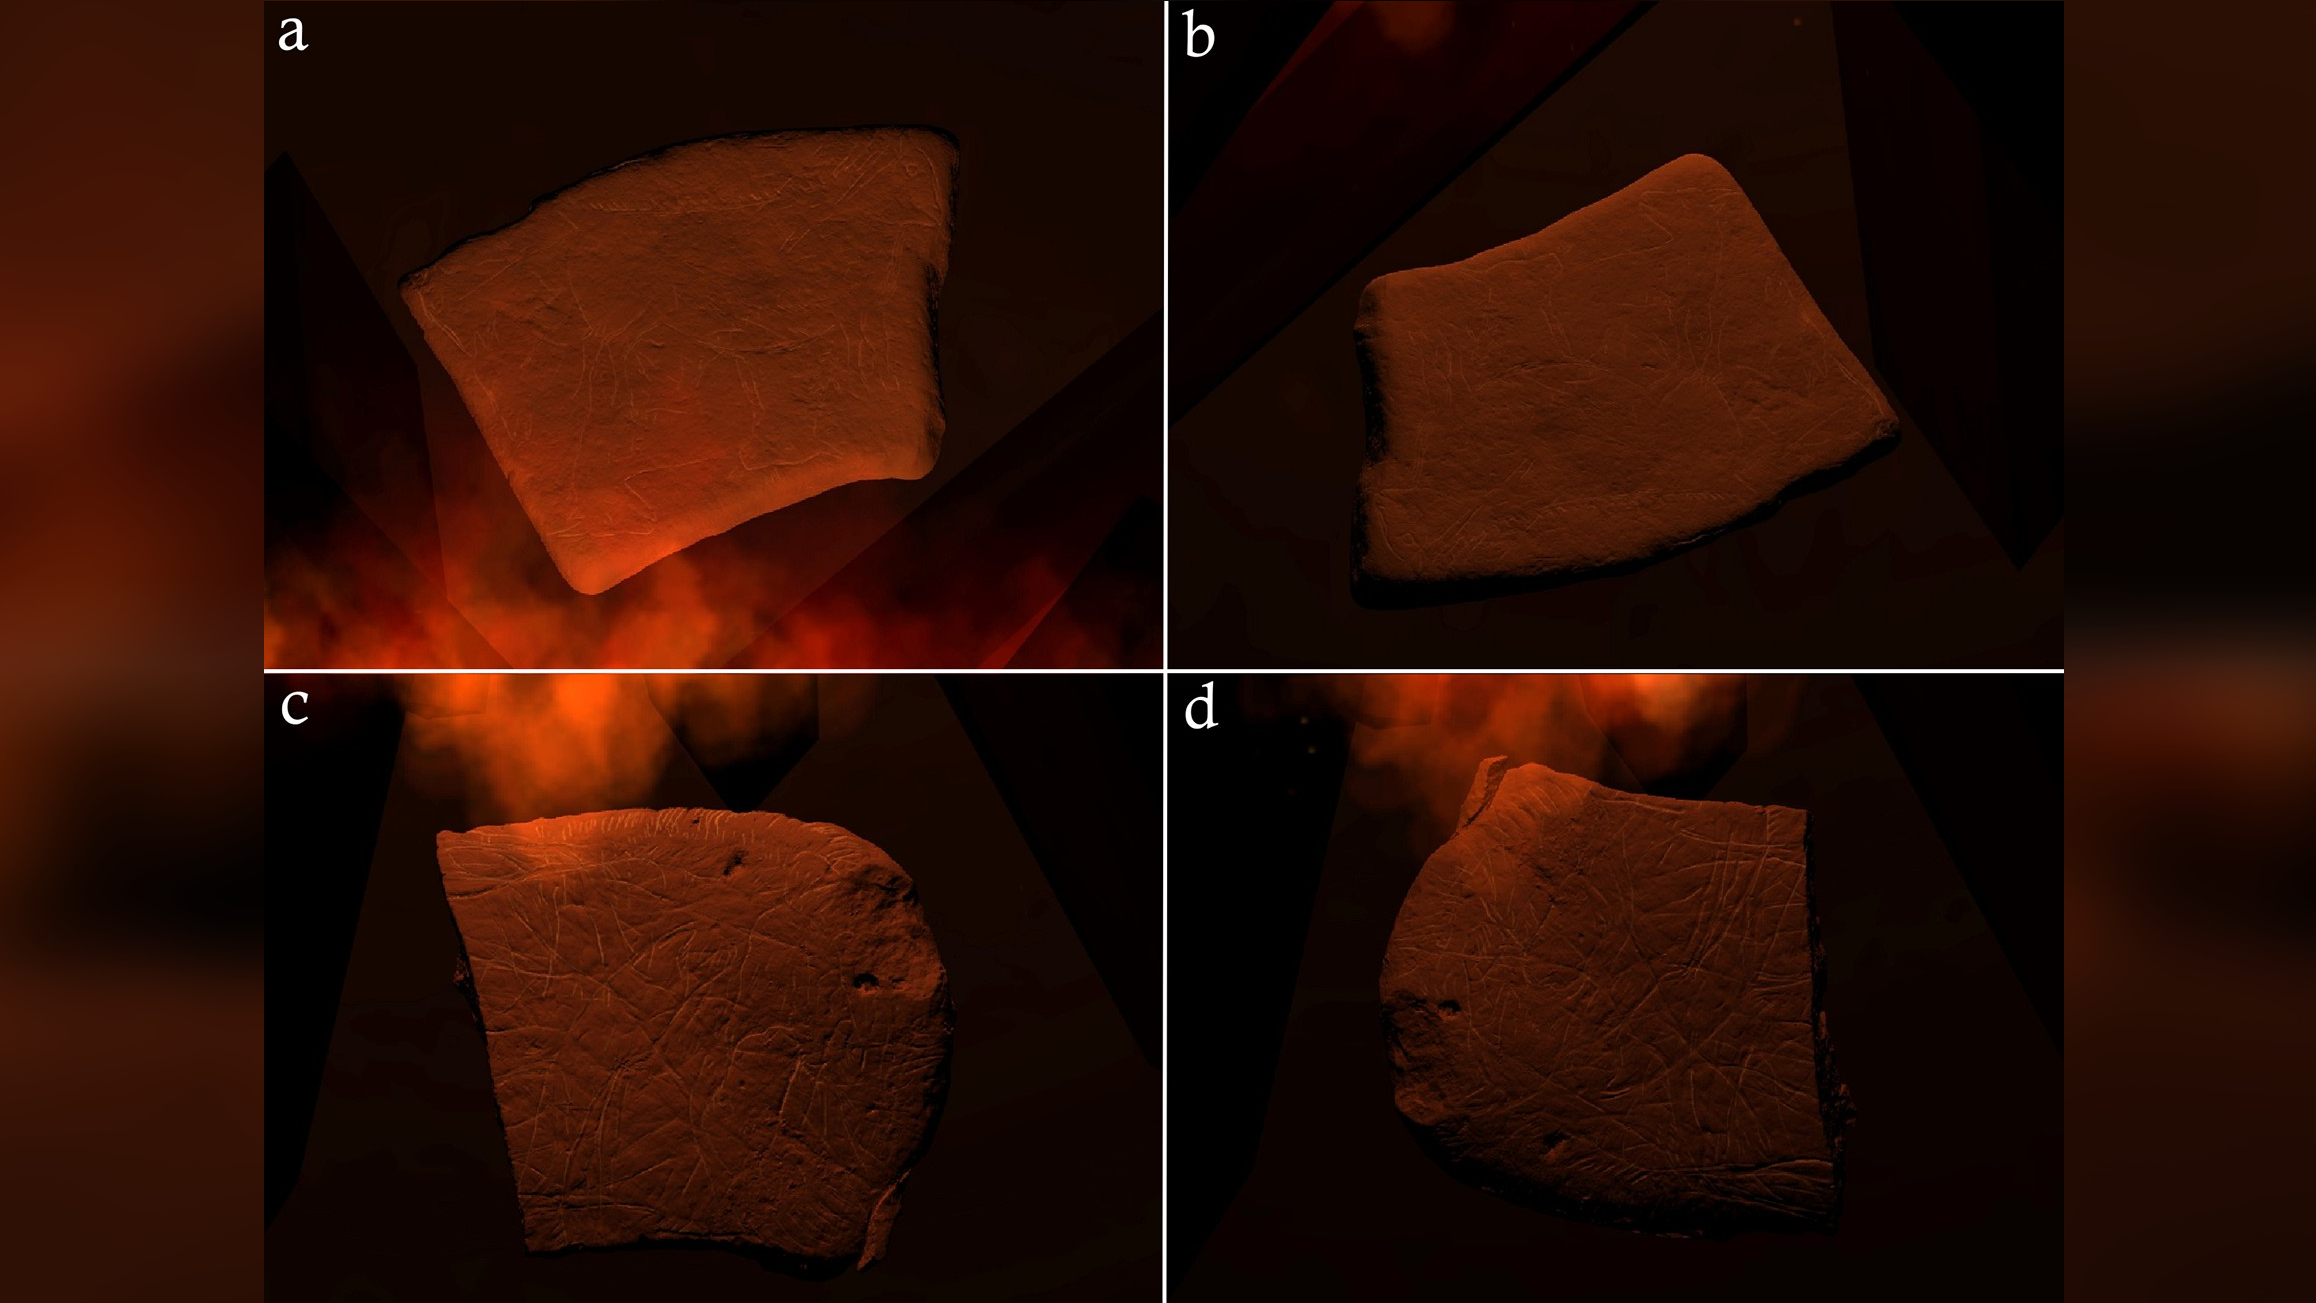 The experiments with 3-dimensional scans of the carved plaques and computer-generated firelight revealed that various portraits of animals may have been animated by the flickering firelight.